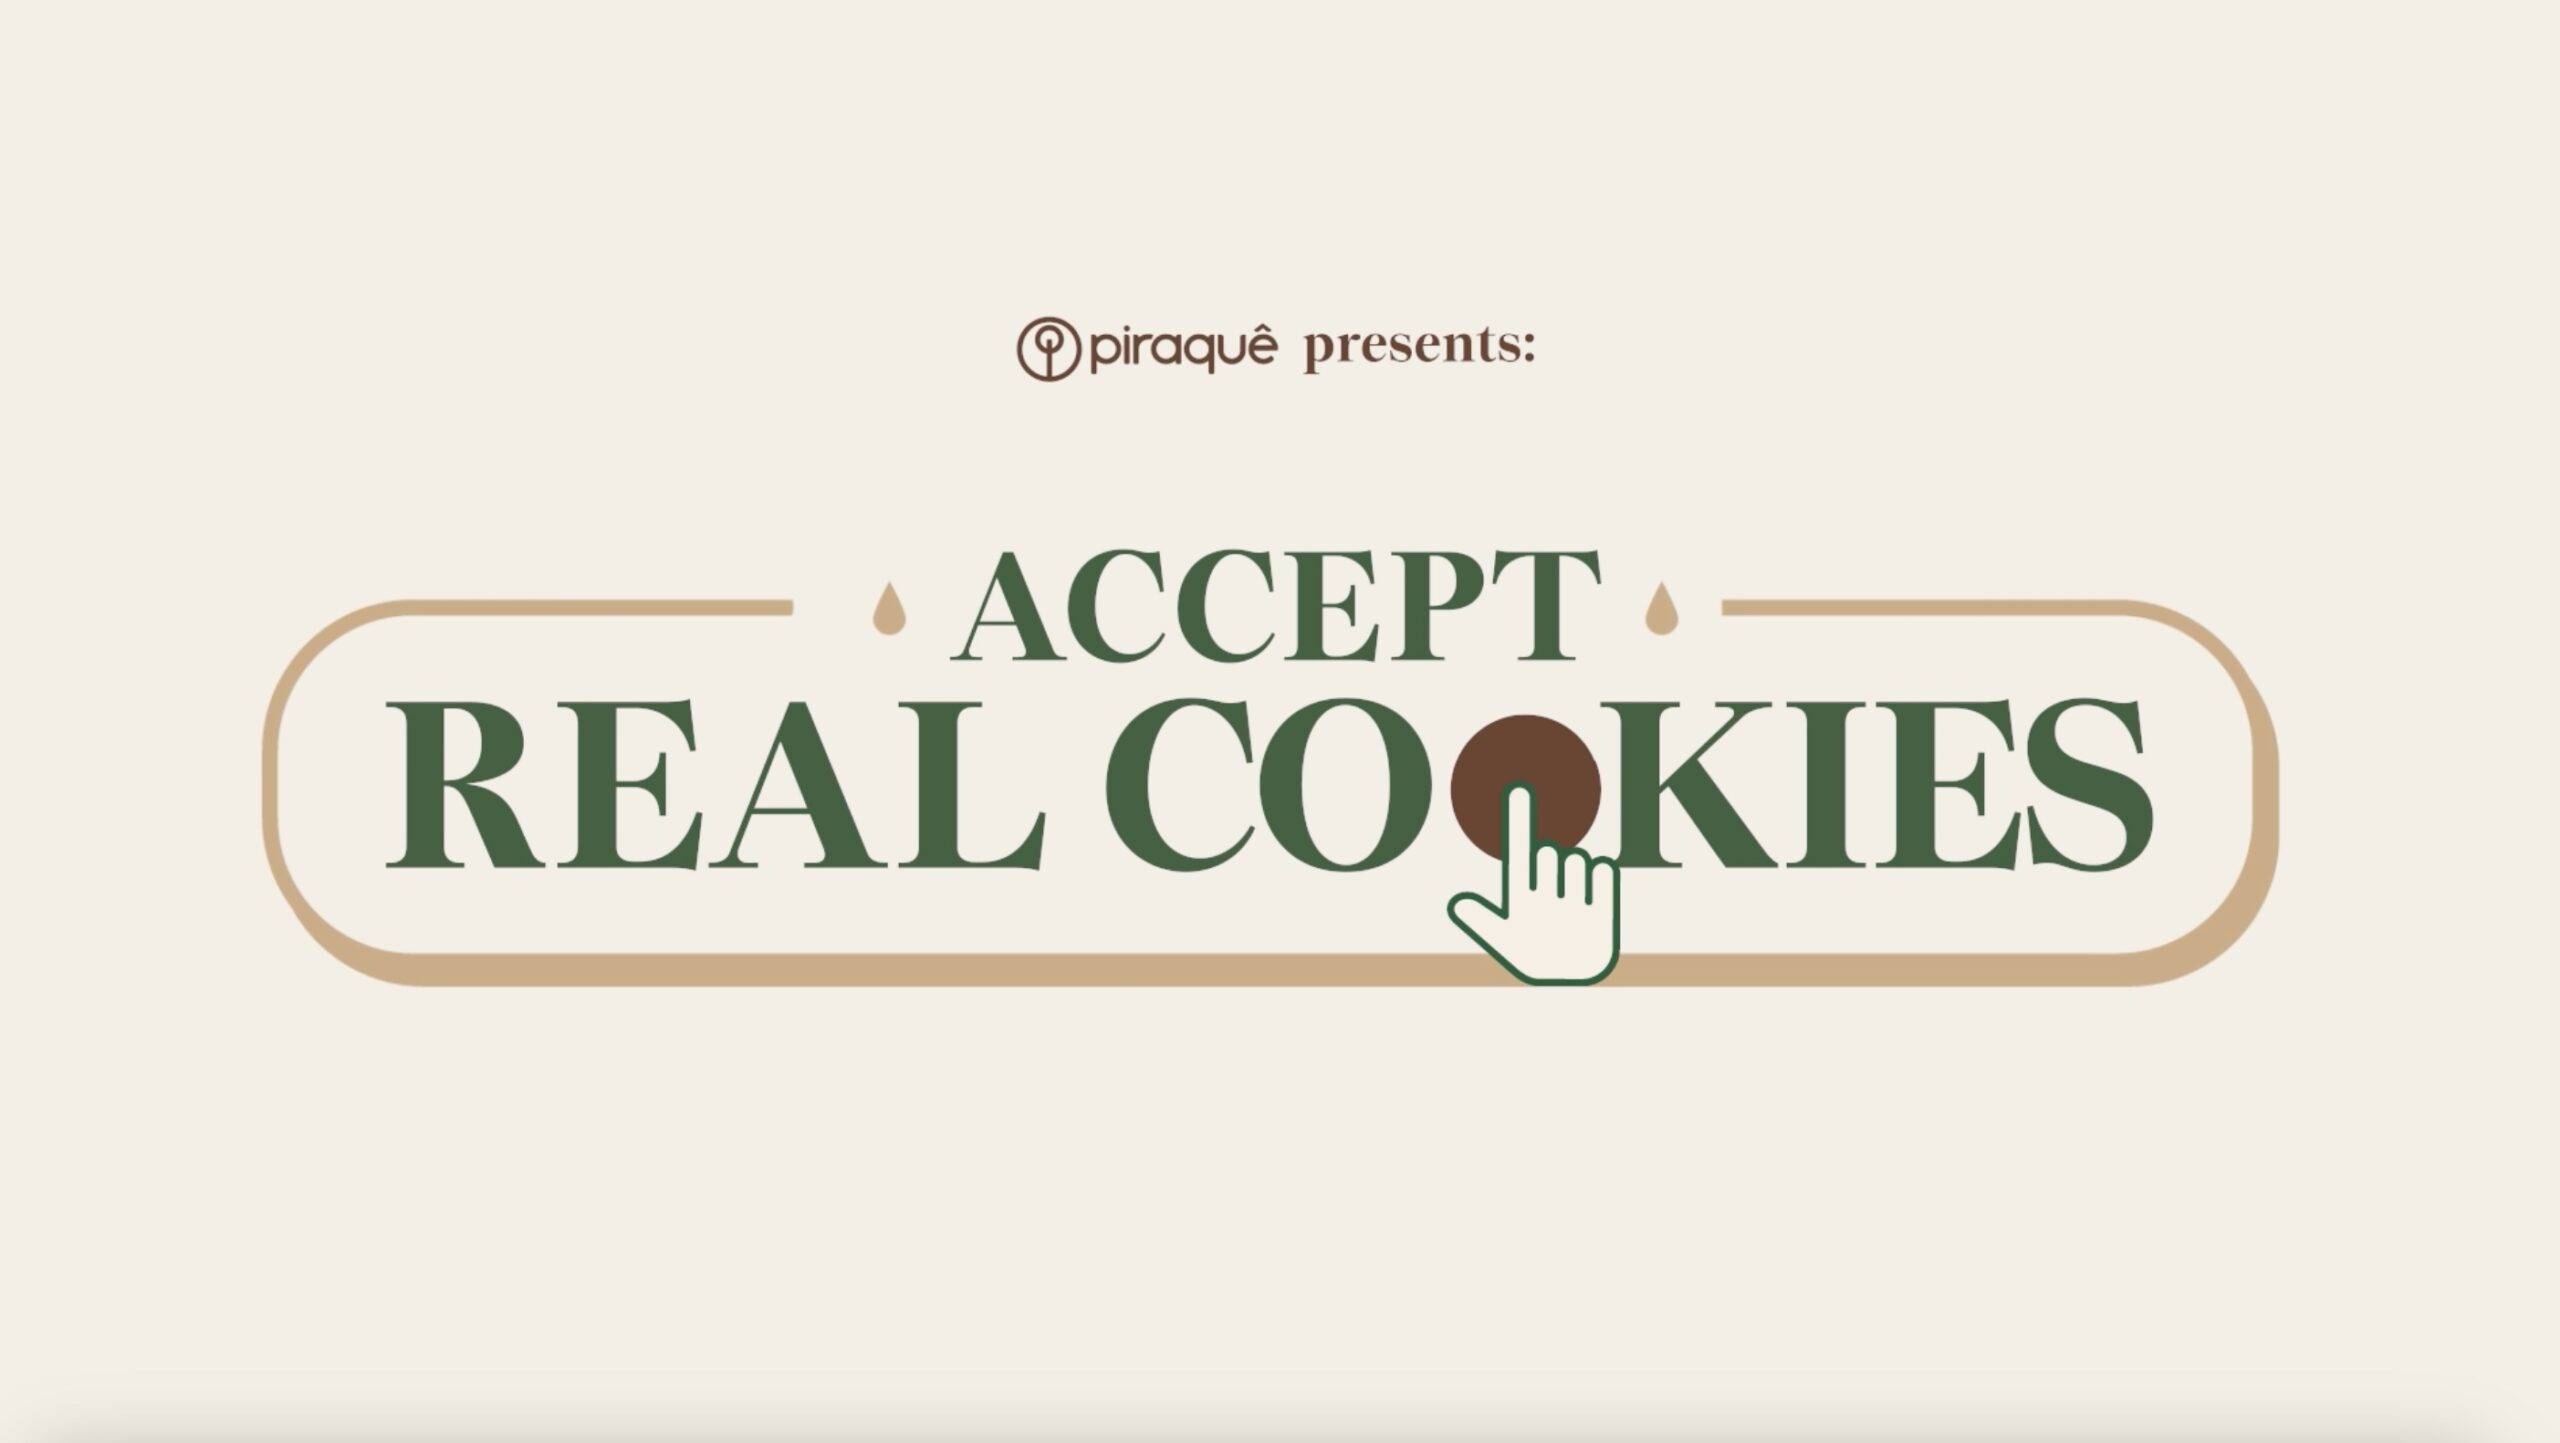 A text box prompt that says "Accept Real Cookies"